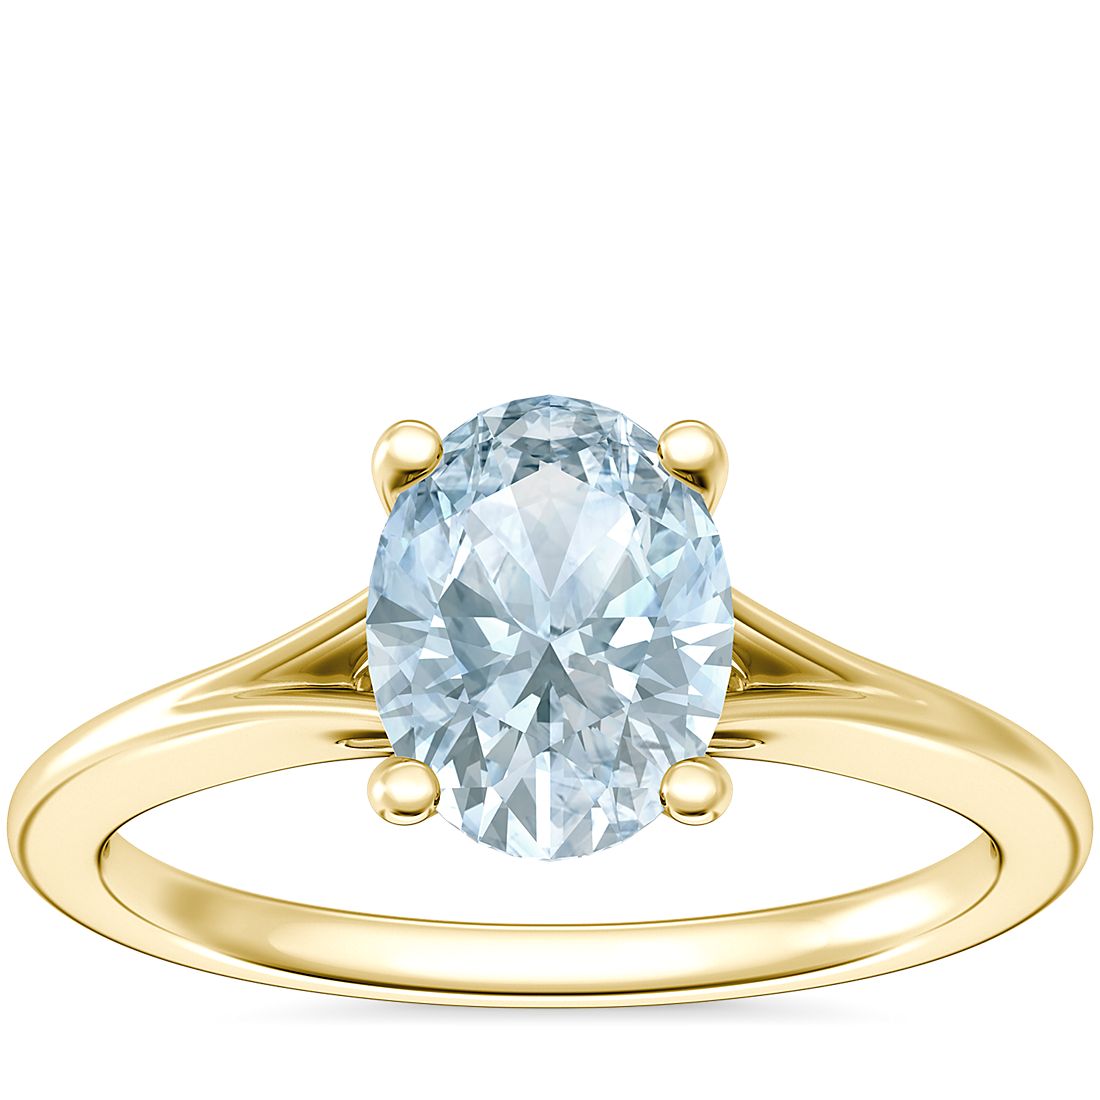 Petite Split Shank Solitaire Engagement Ring with Oval Aquamarine in 18k Yellow Gold (8x6mm)